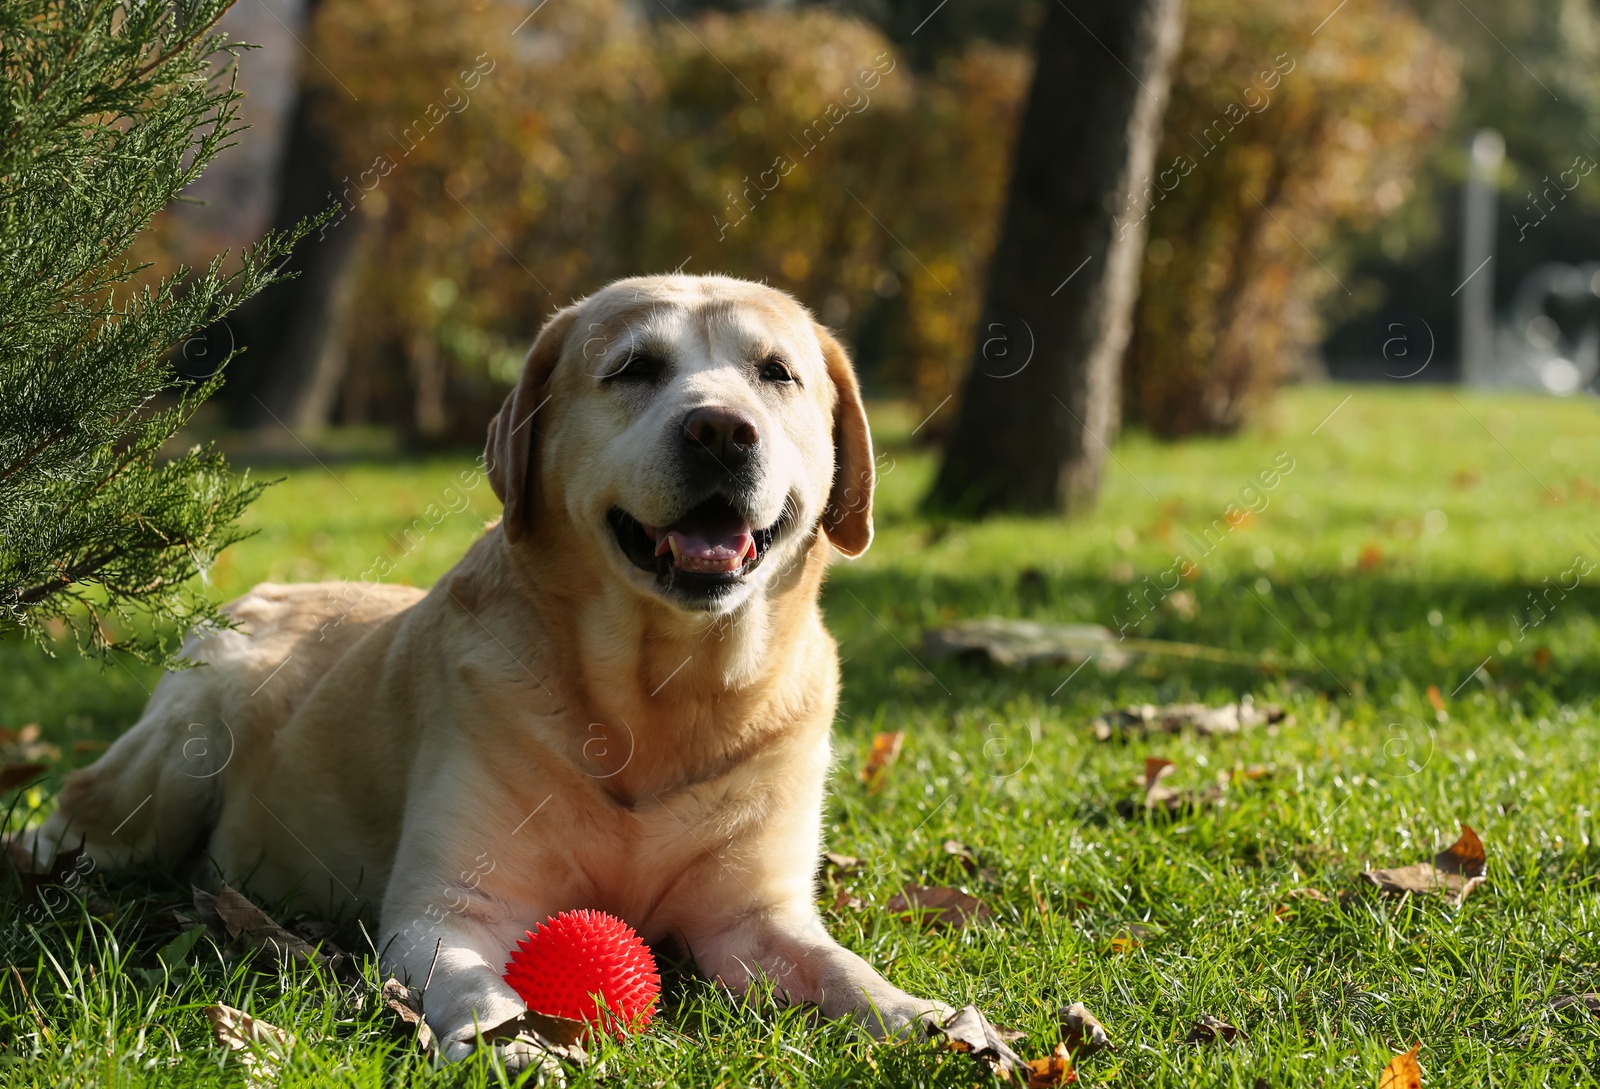 Photo of Yellow Labrador with ball in park on sunny day